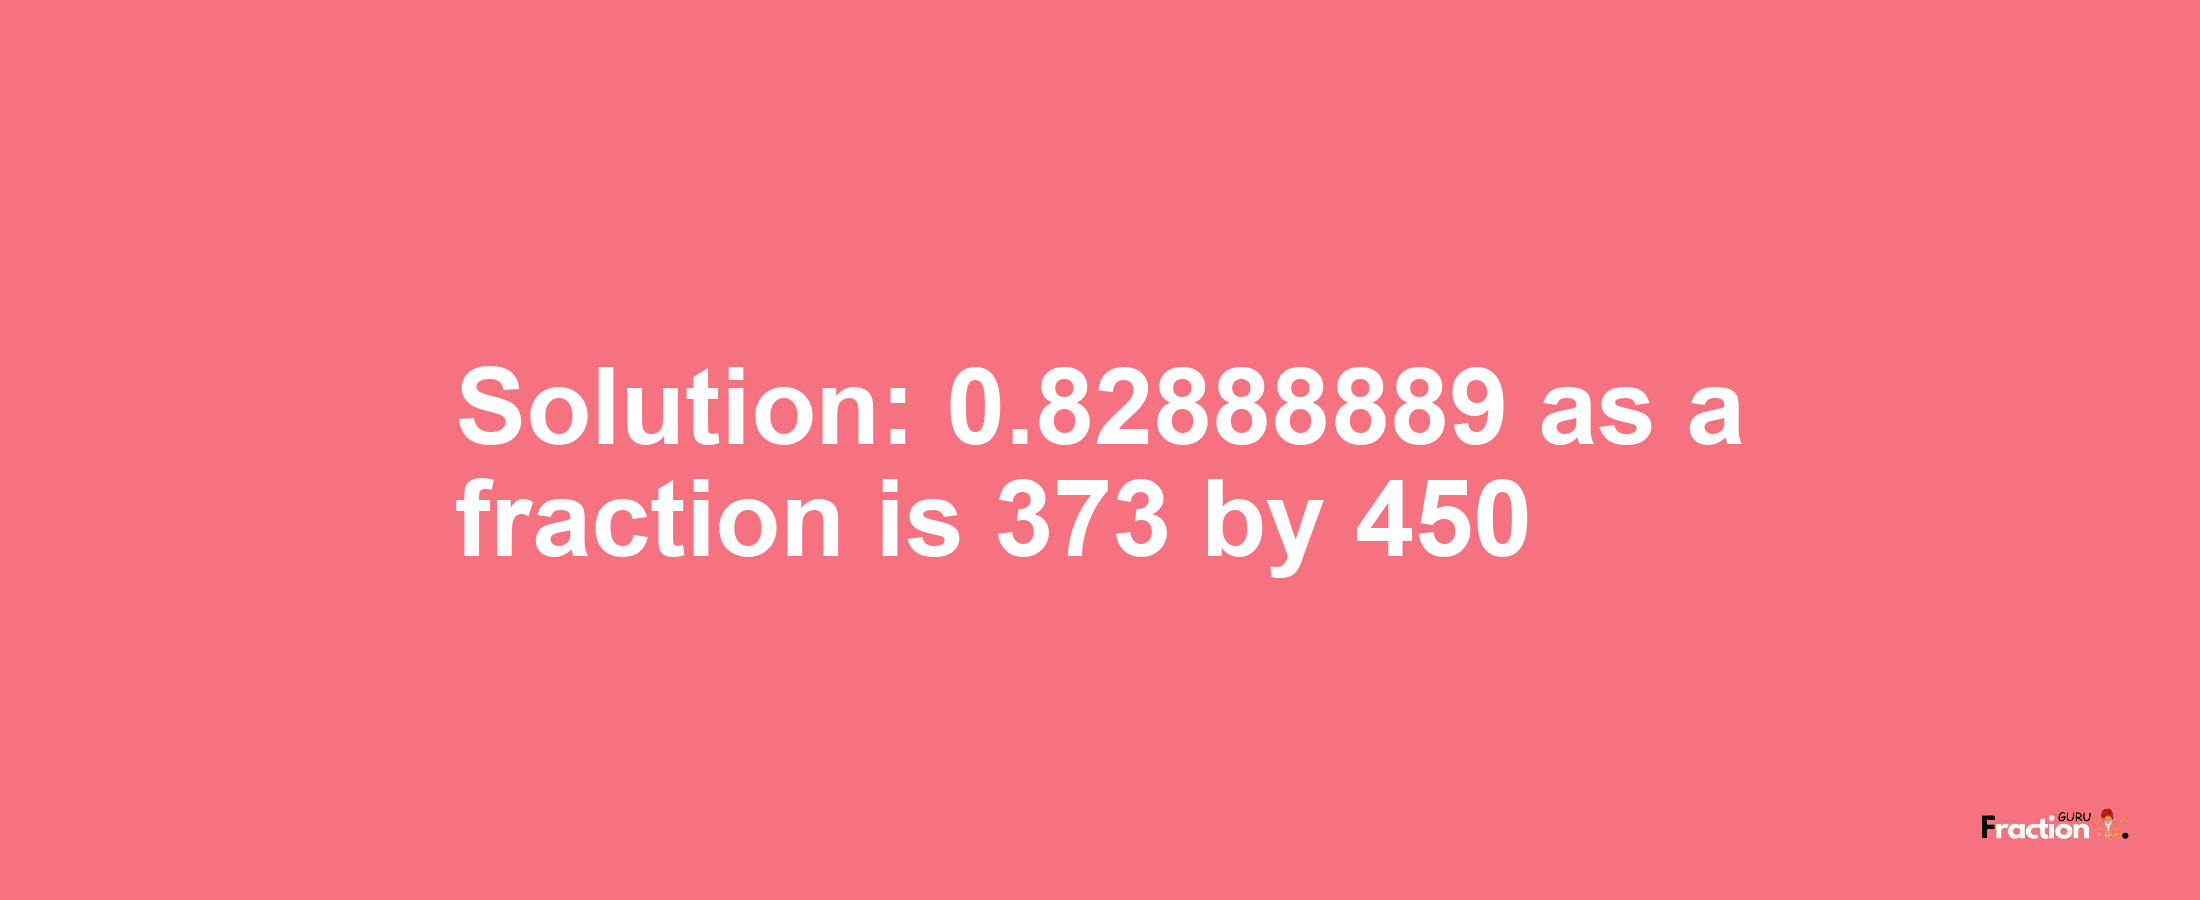 Solution:0.82888889 as a fraction is 373/450